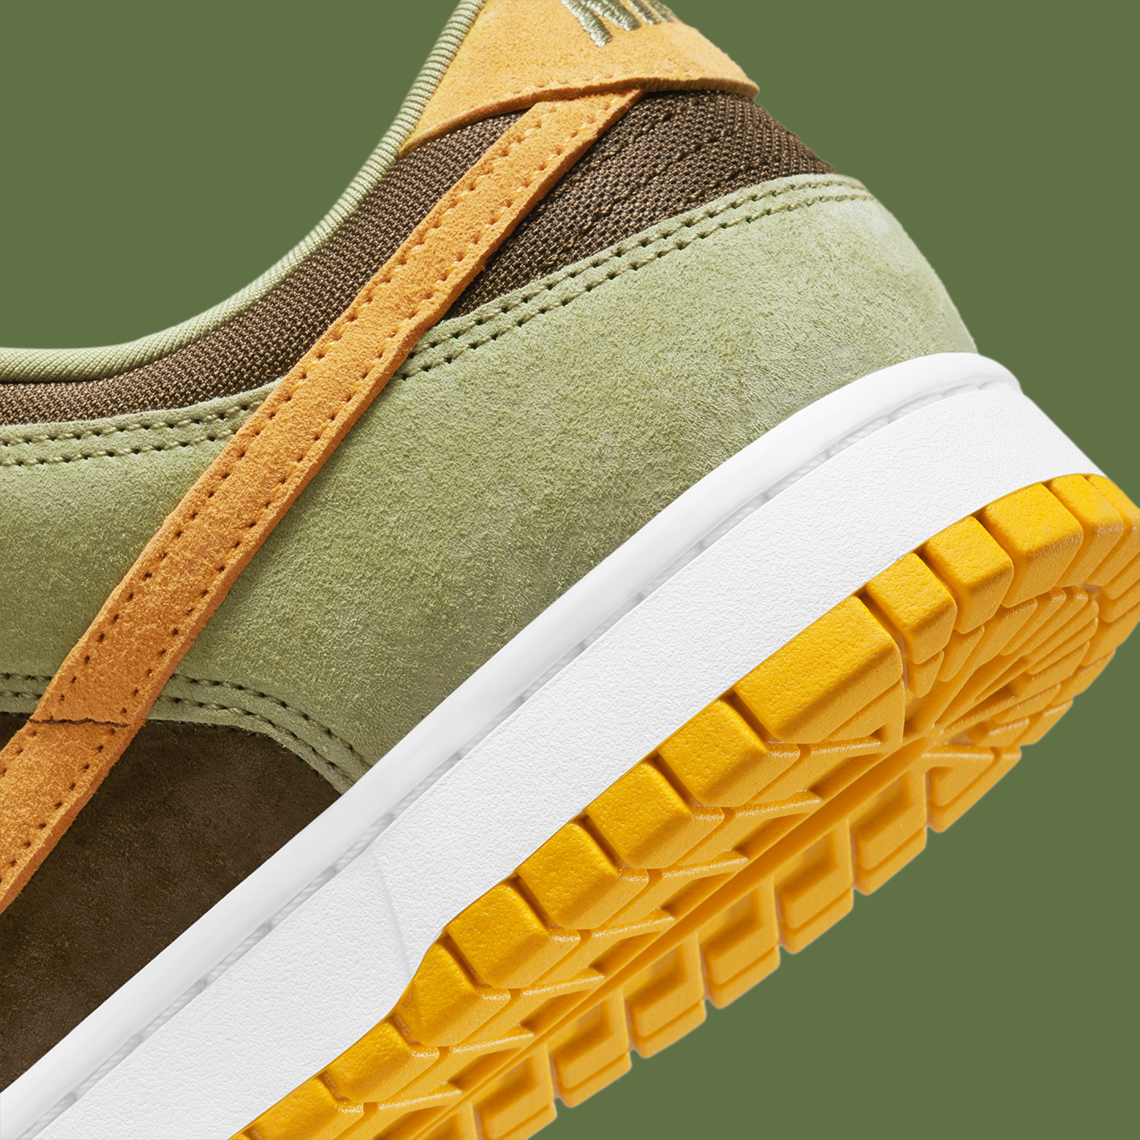 nike Dunk off low dusty olive DH5360 300 8